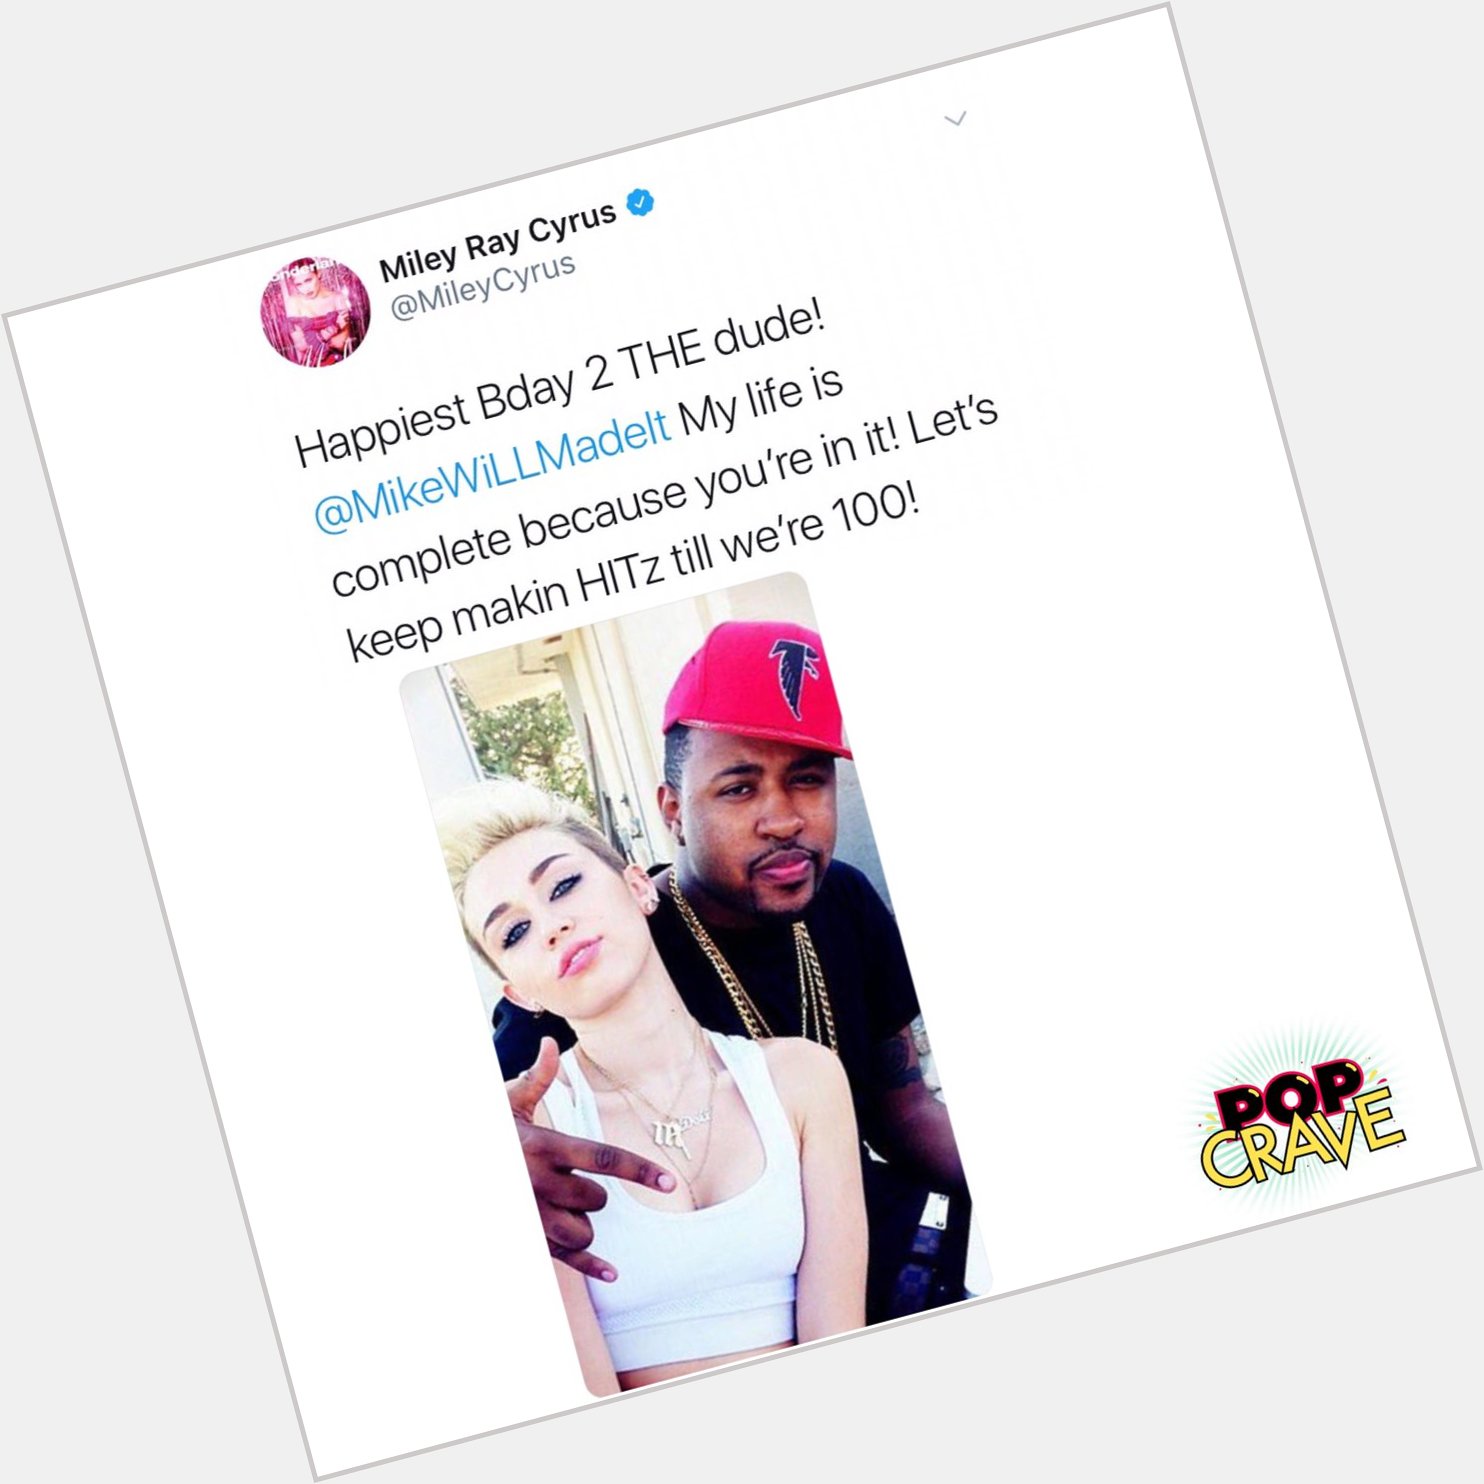 Miley Cyrus wishes \Bangerz\ producer Mike WiLL Made It a happy birthday: Let\s keep making HITS 